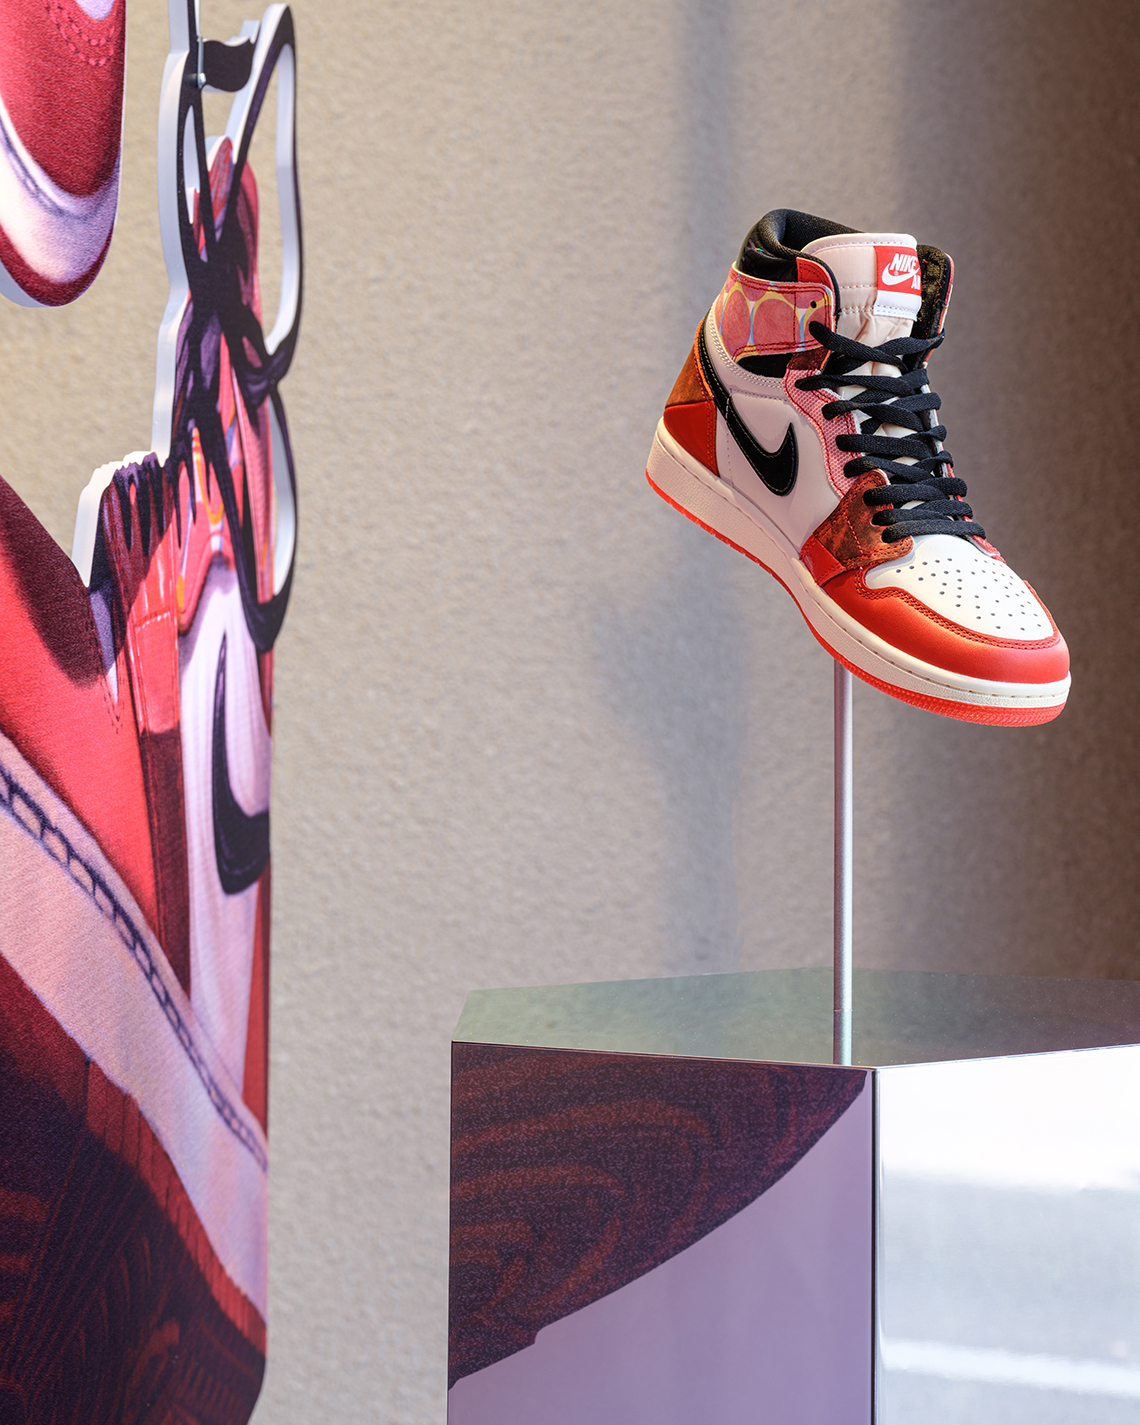 The Air Jordan 1 High Zoom Crater Launches Stateside On 9 11 Spiderverse Store List 6